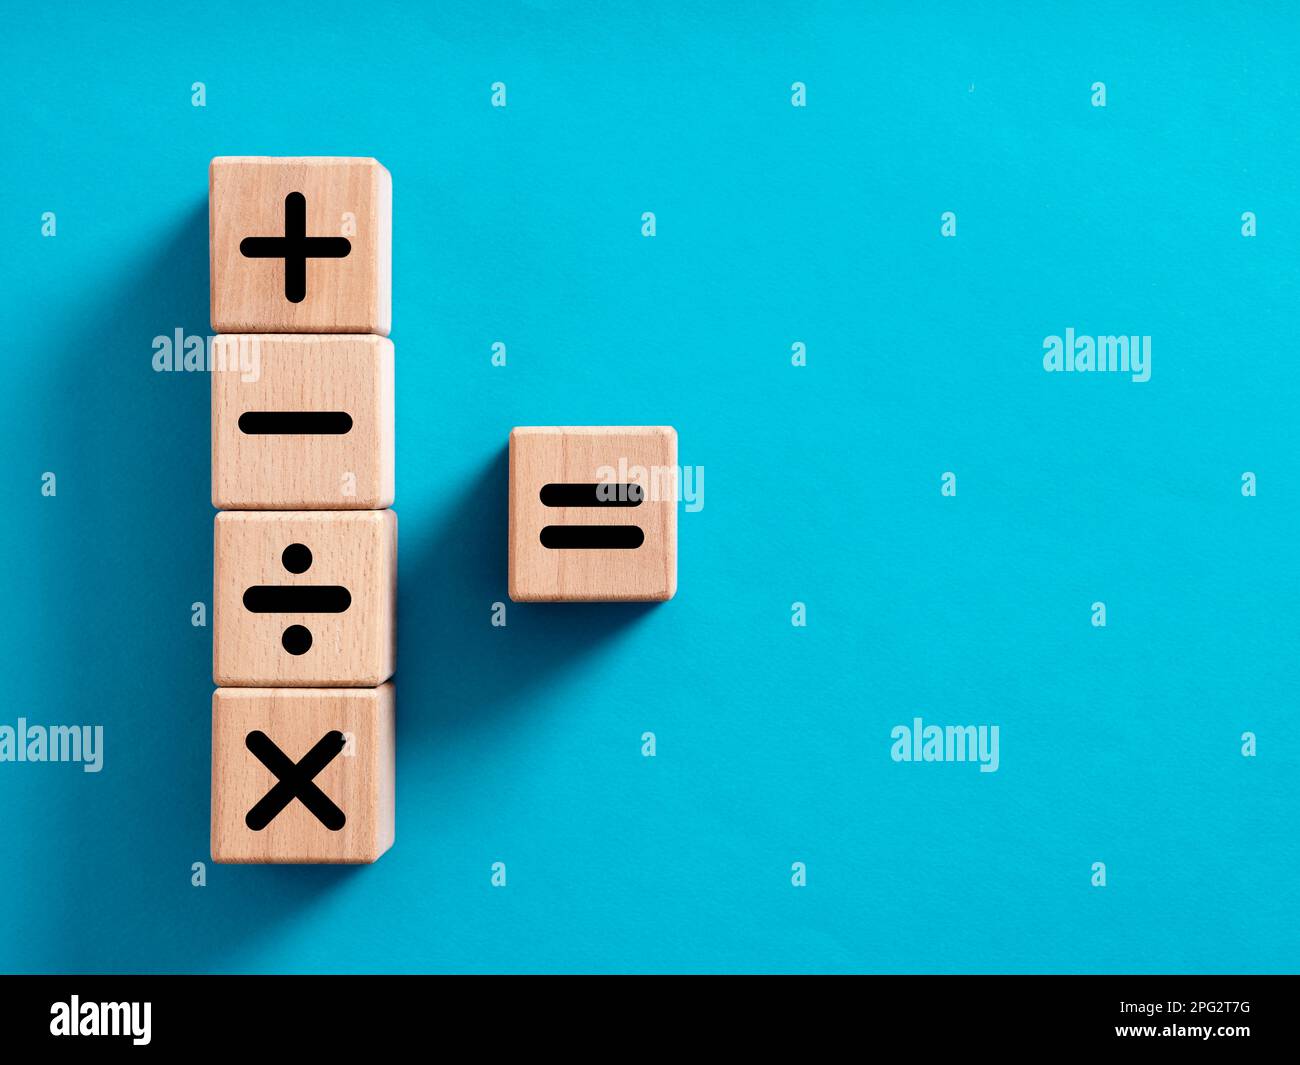 Basic mathematical operations symbols. Plus, minus, multiply, divide and equal symbols on wooden cubes. Mathematic or math education and basic calcula Stock Photo